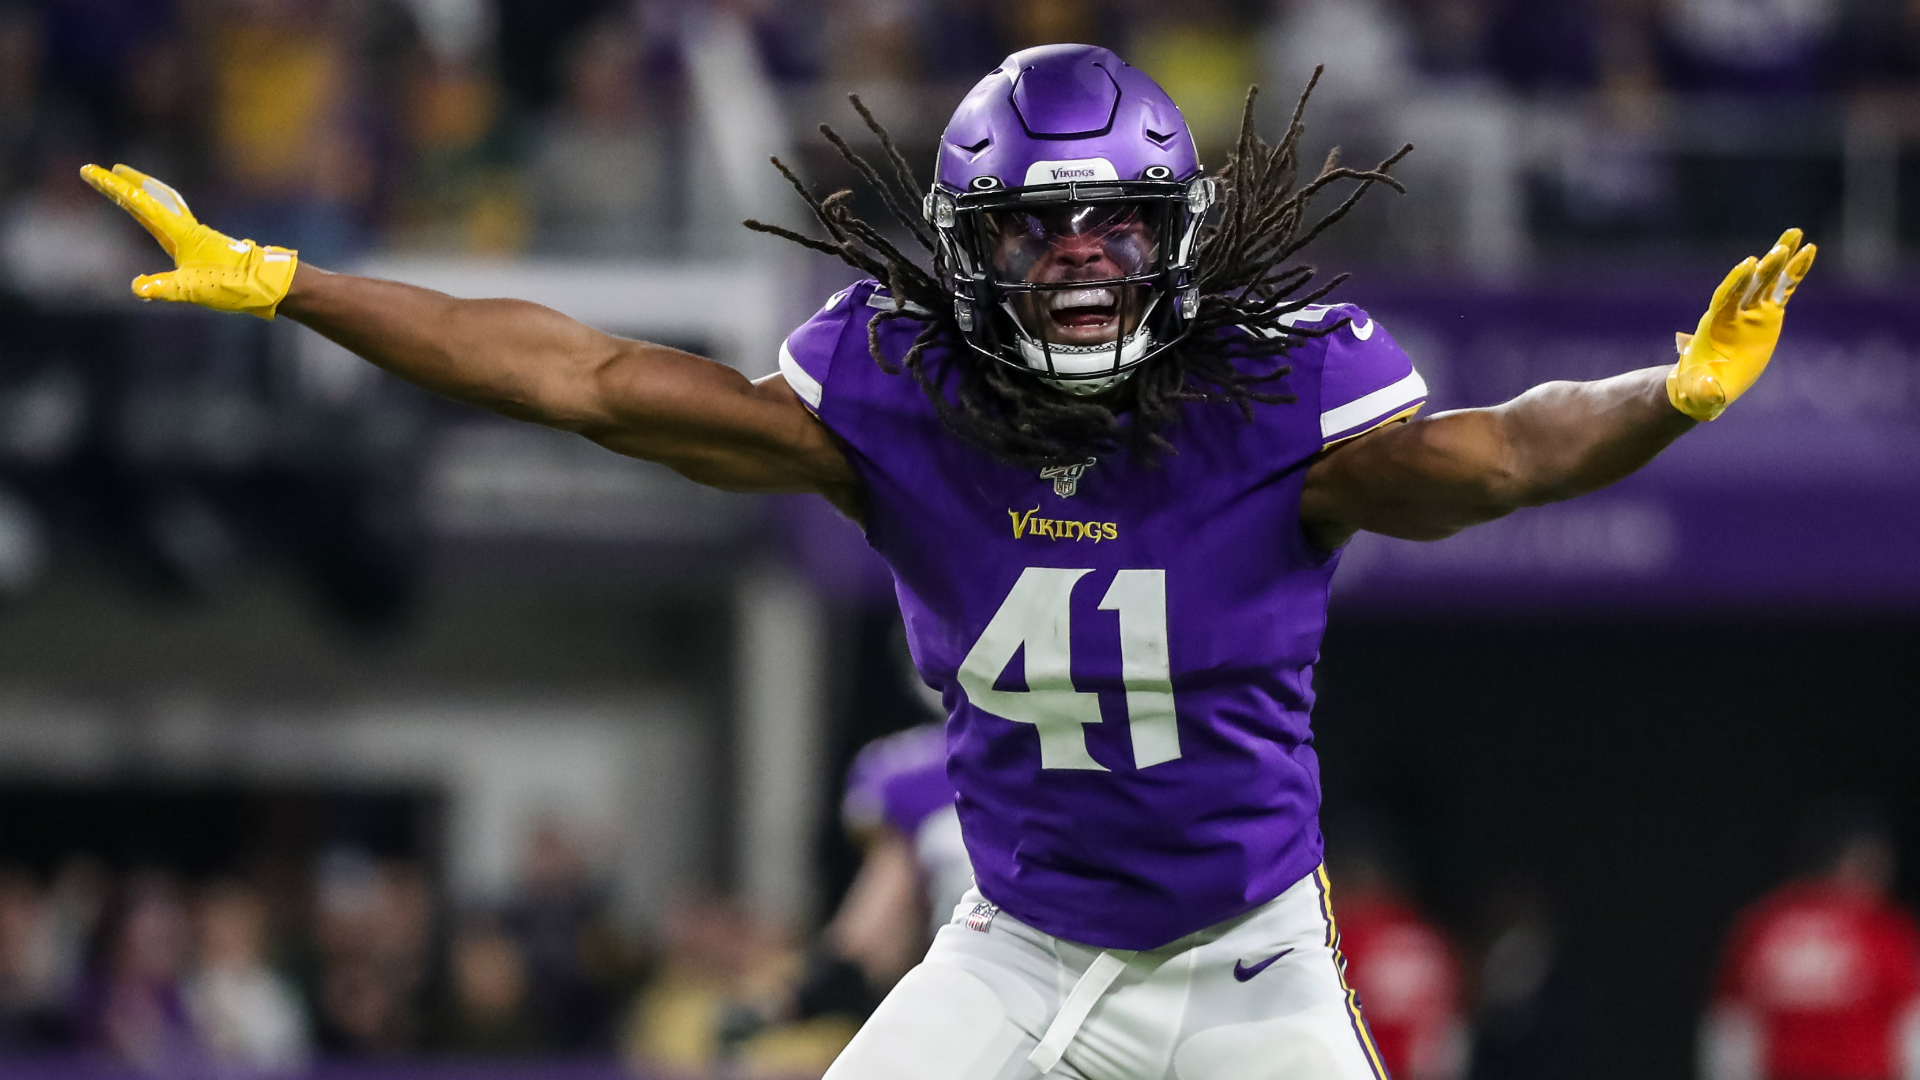 Nfl Rumors Giants Tried Trading For Vikings Anthony Harris Early